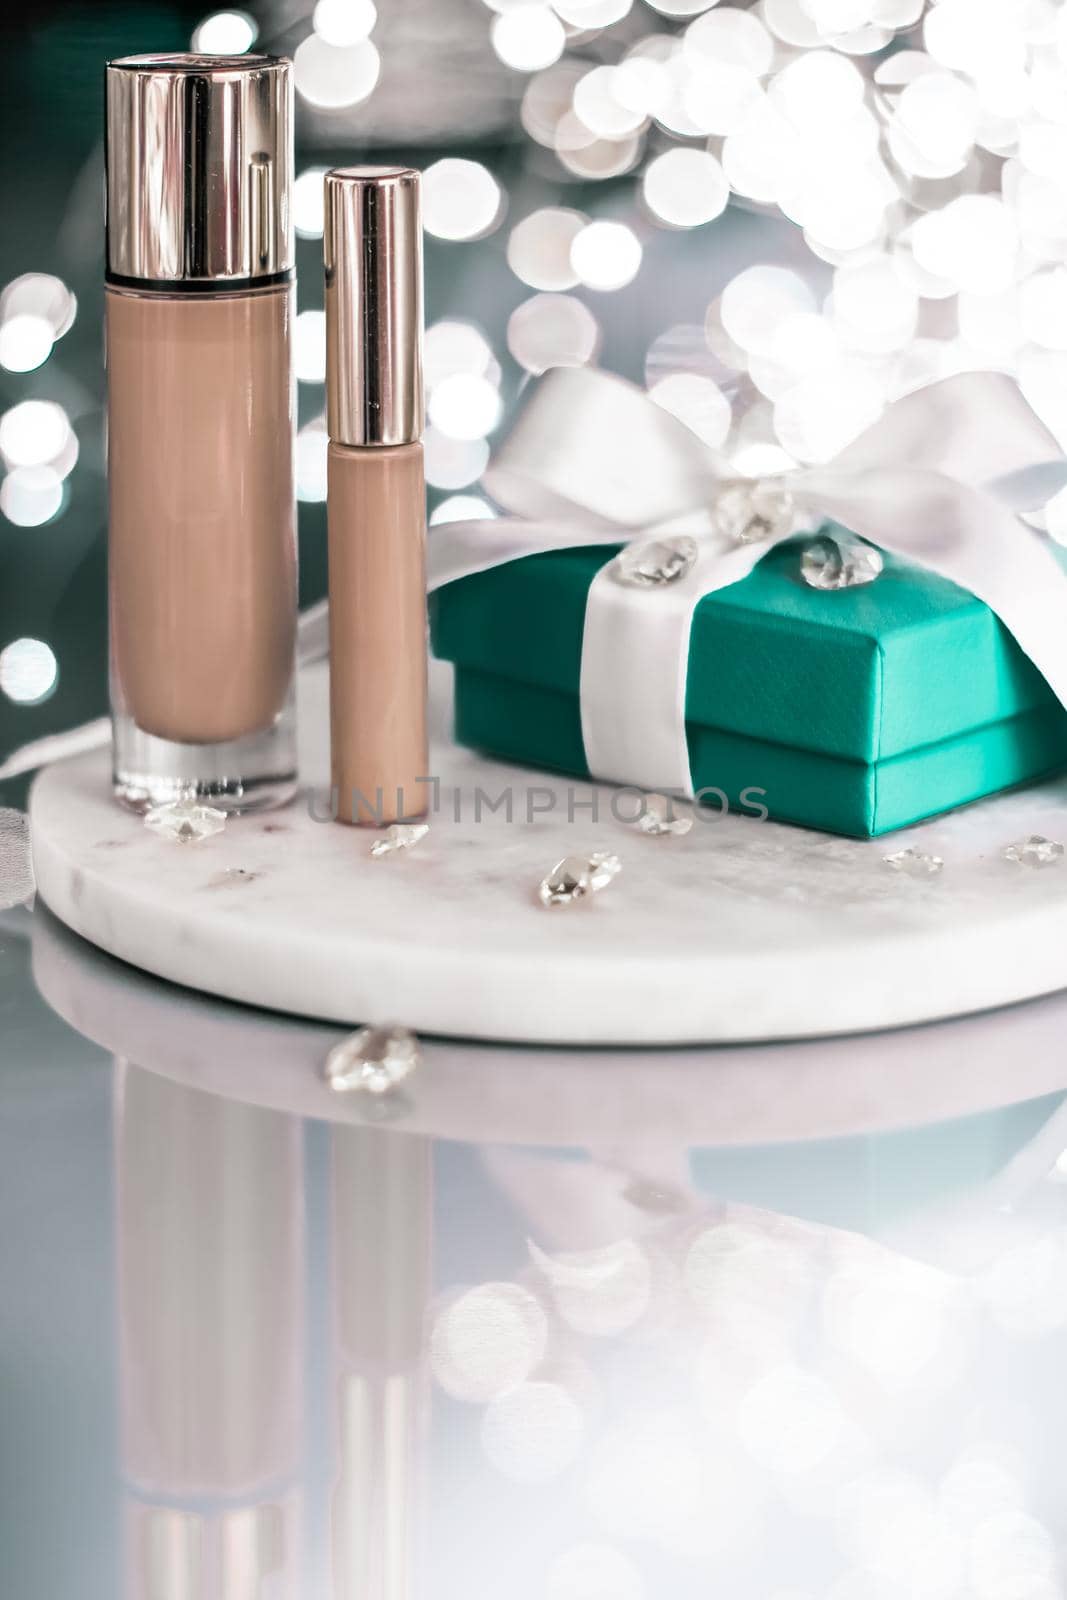 Cosmetic branding, Christmas glitter and girly blog concept - Holiday make-up foundation base, concealer and green gift box, luxury cosmetics present and blank label products for beauty brand design